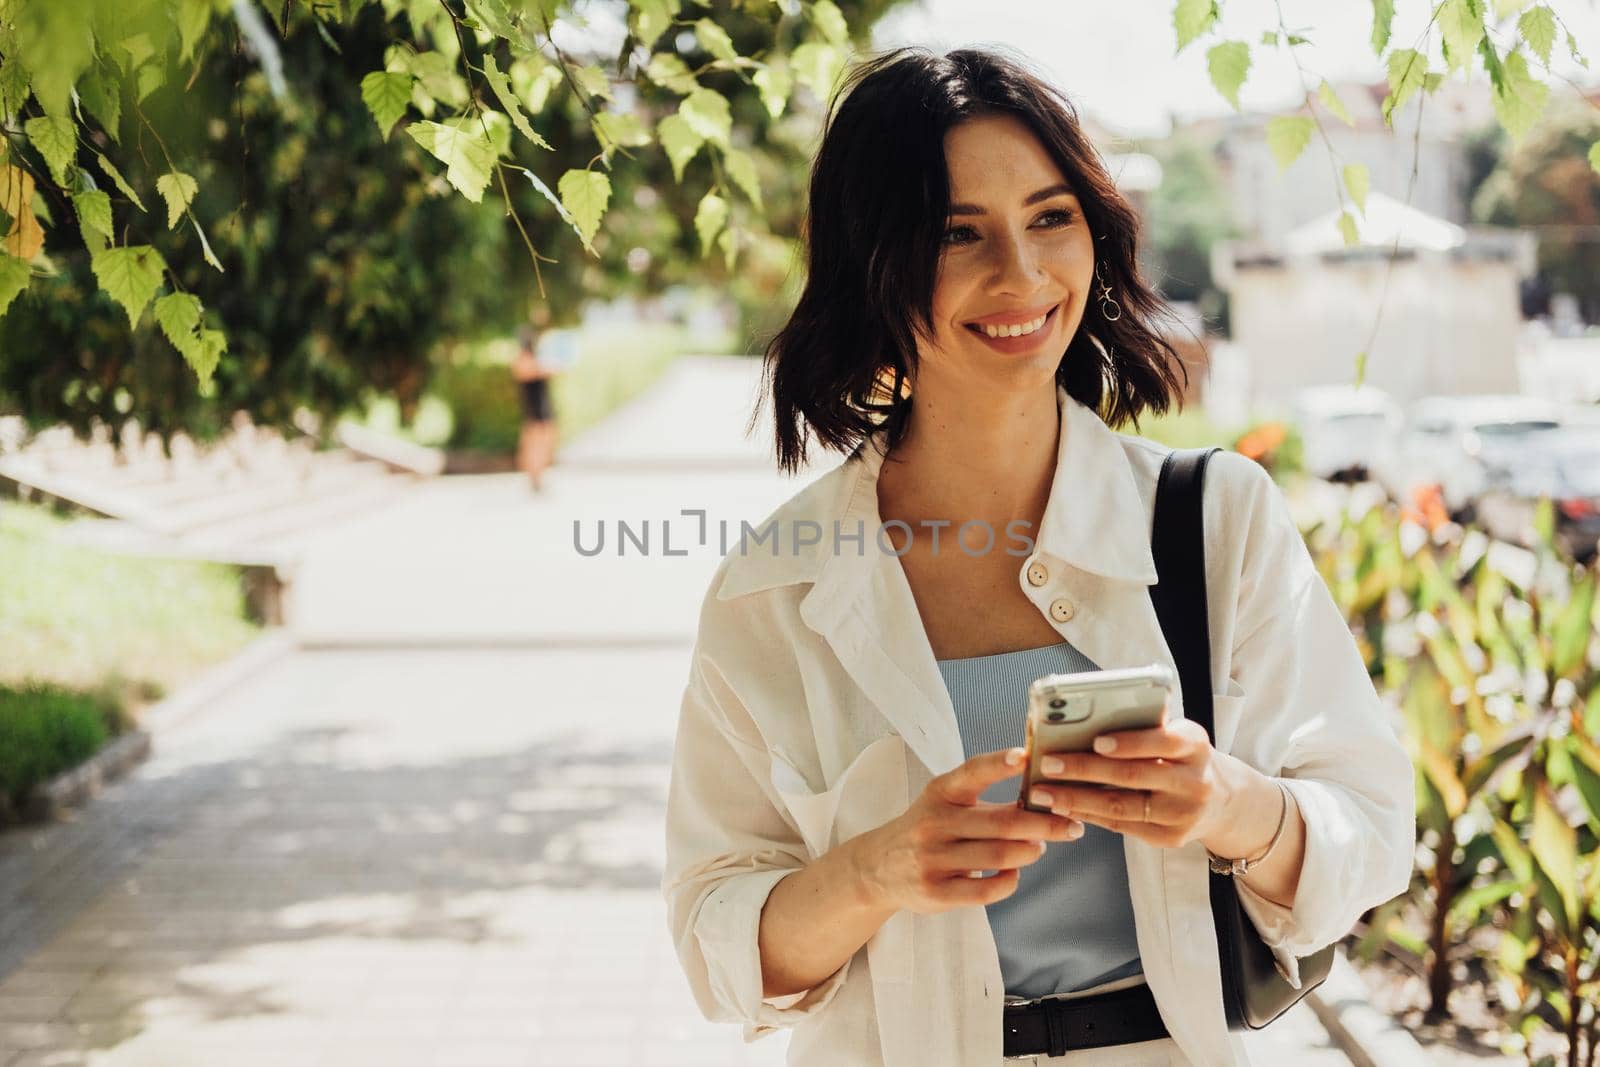 Cheerful Young Woman Holding Smartphone While Walking Outdoors in Park at Summer Sunny Day, Copy Space